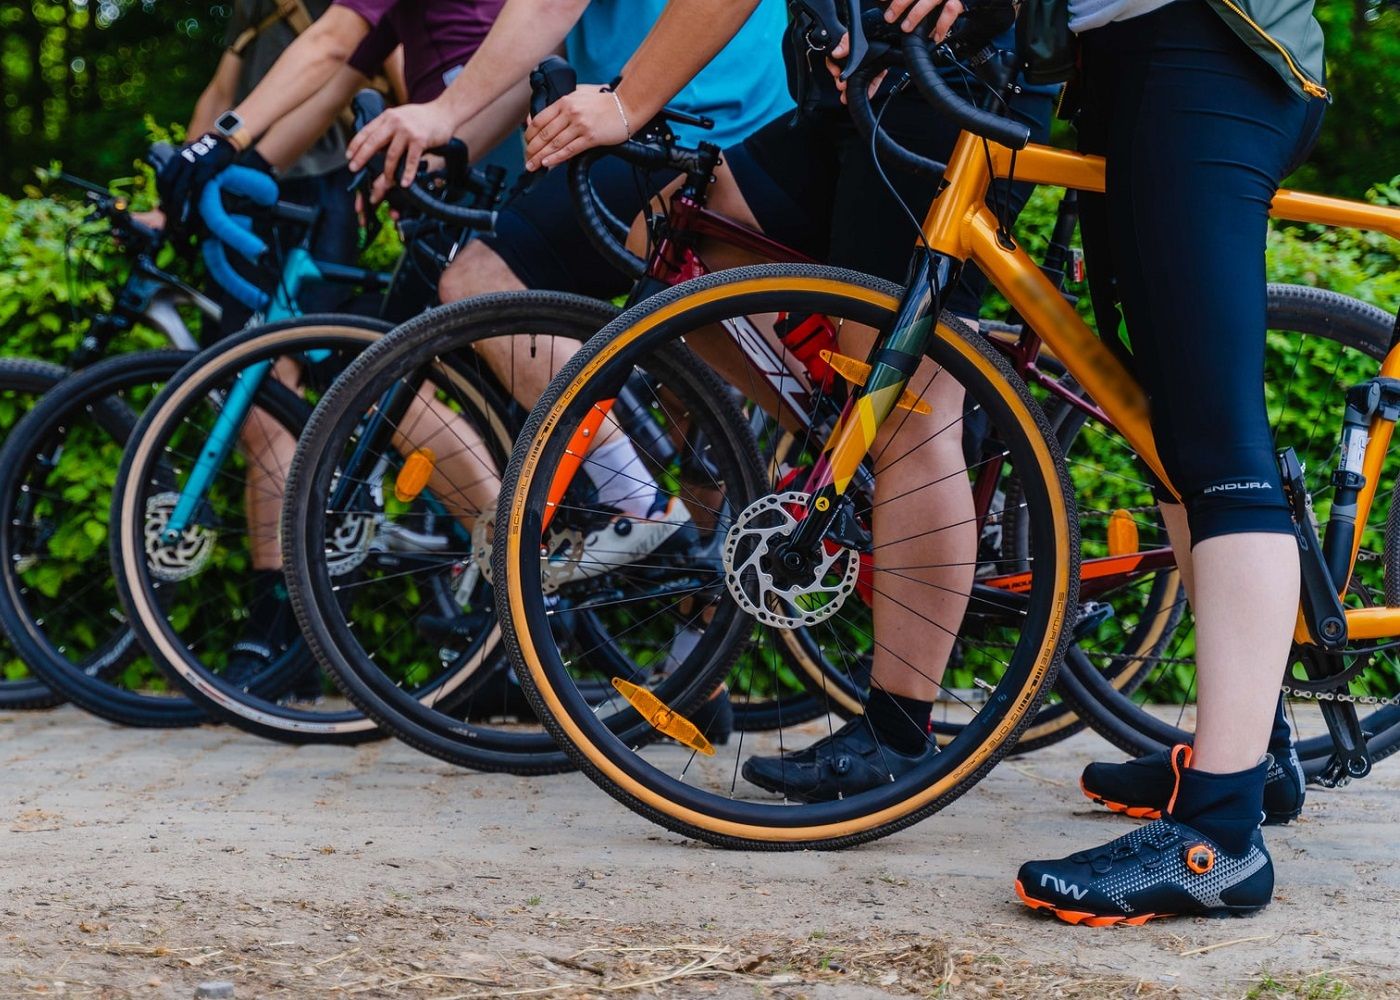 Close picture of group of bikes focused on wheels